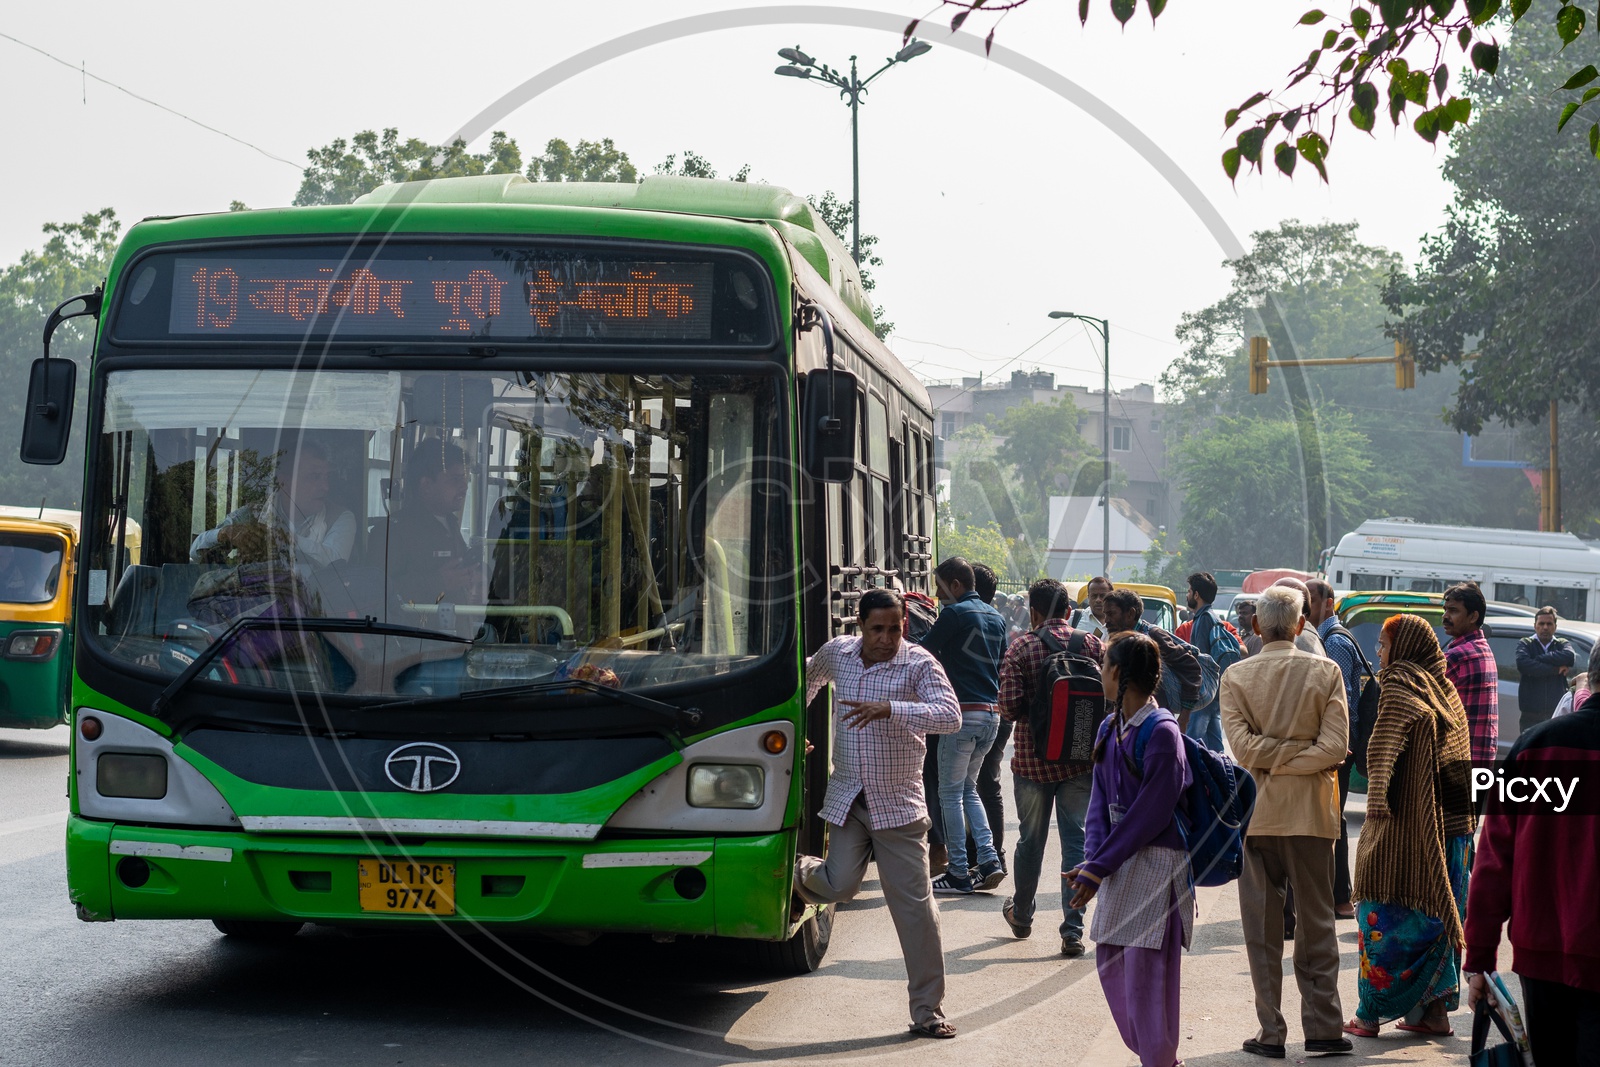 People getting on the bus and getting down from the DTC, Delhi Transport Corporation bus